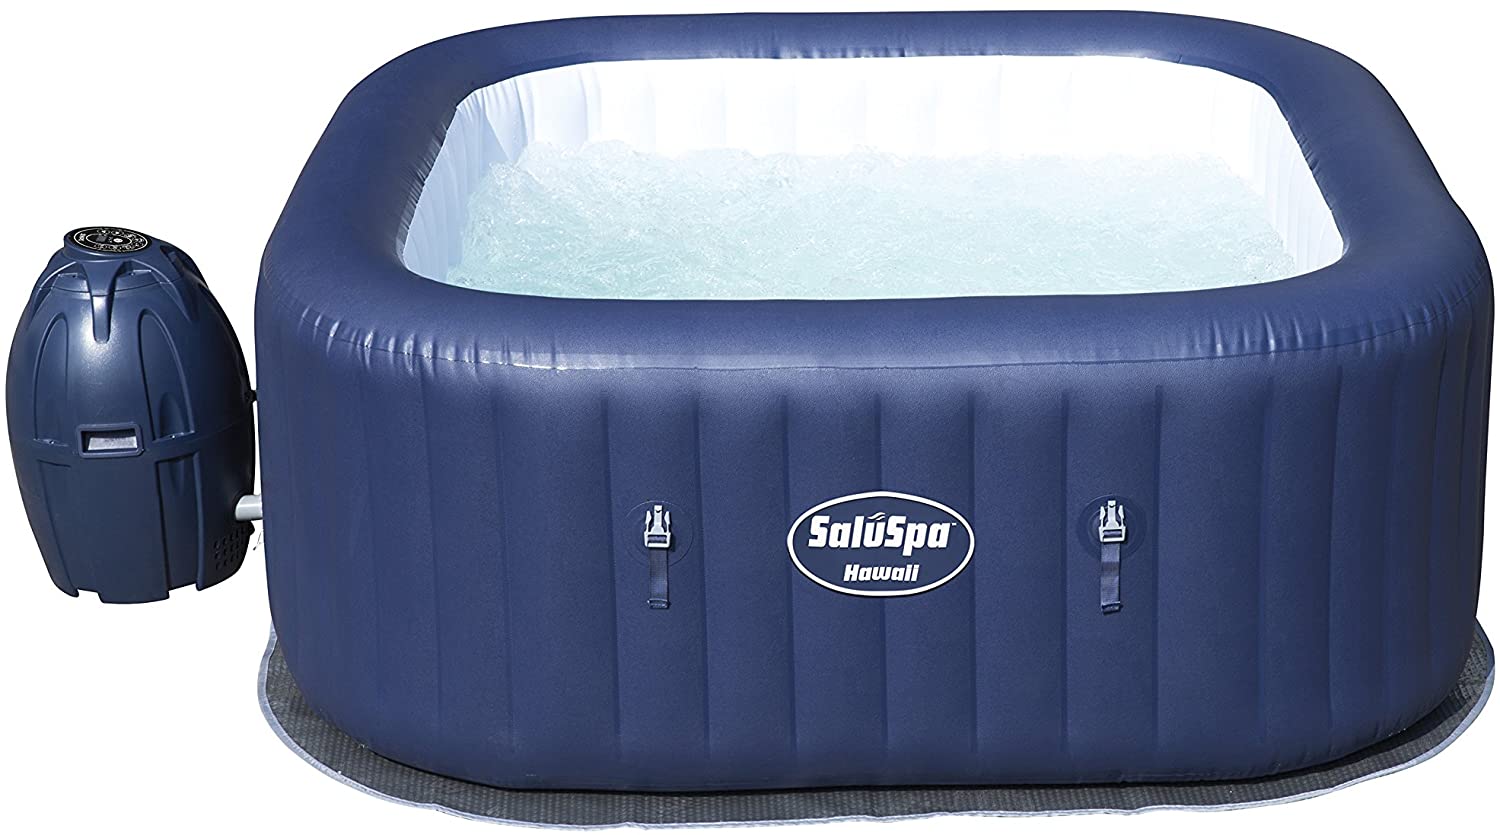 9. Bestway Outdoor Inflatable Hot Tub